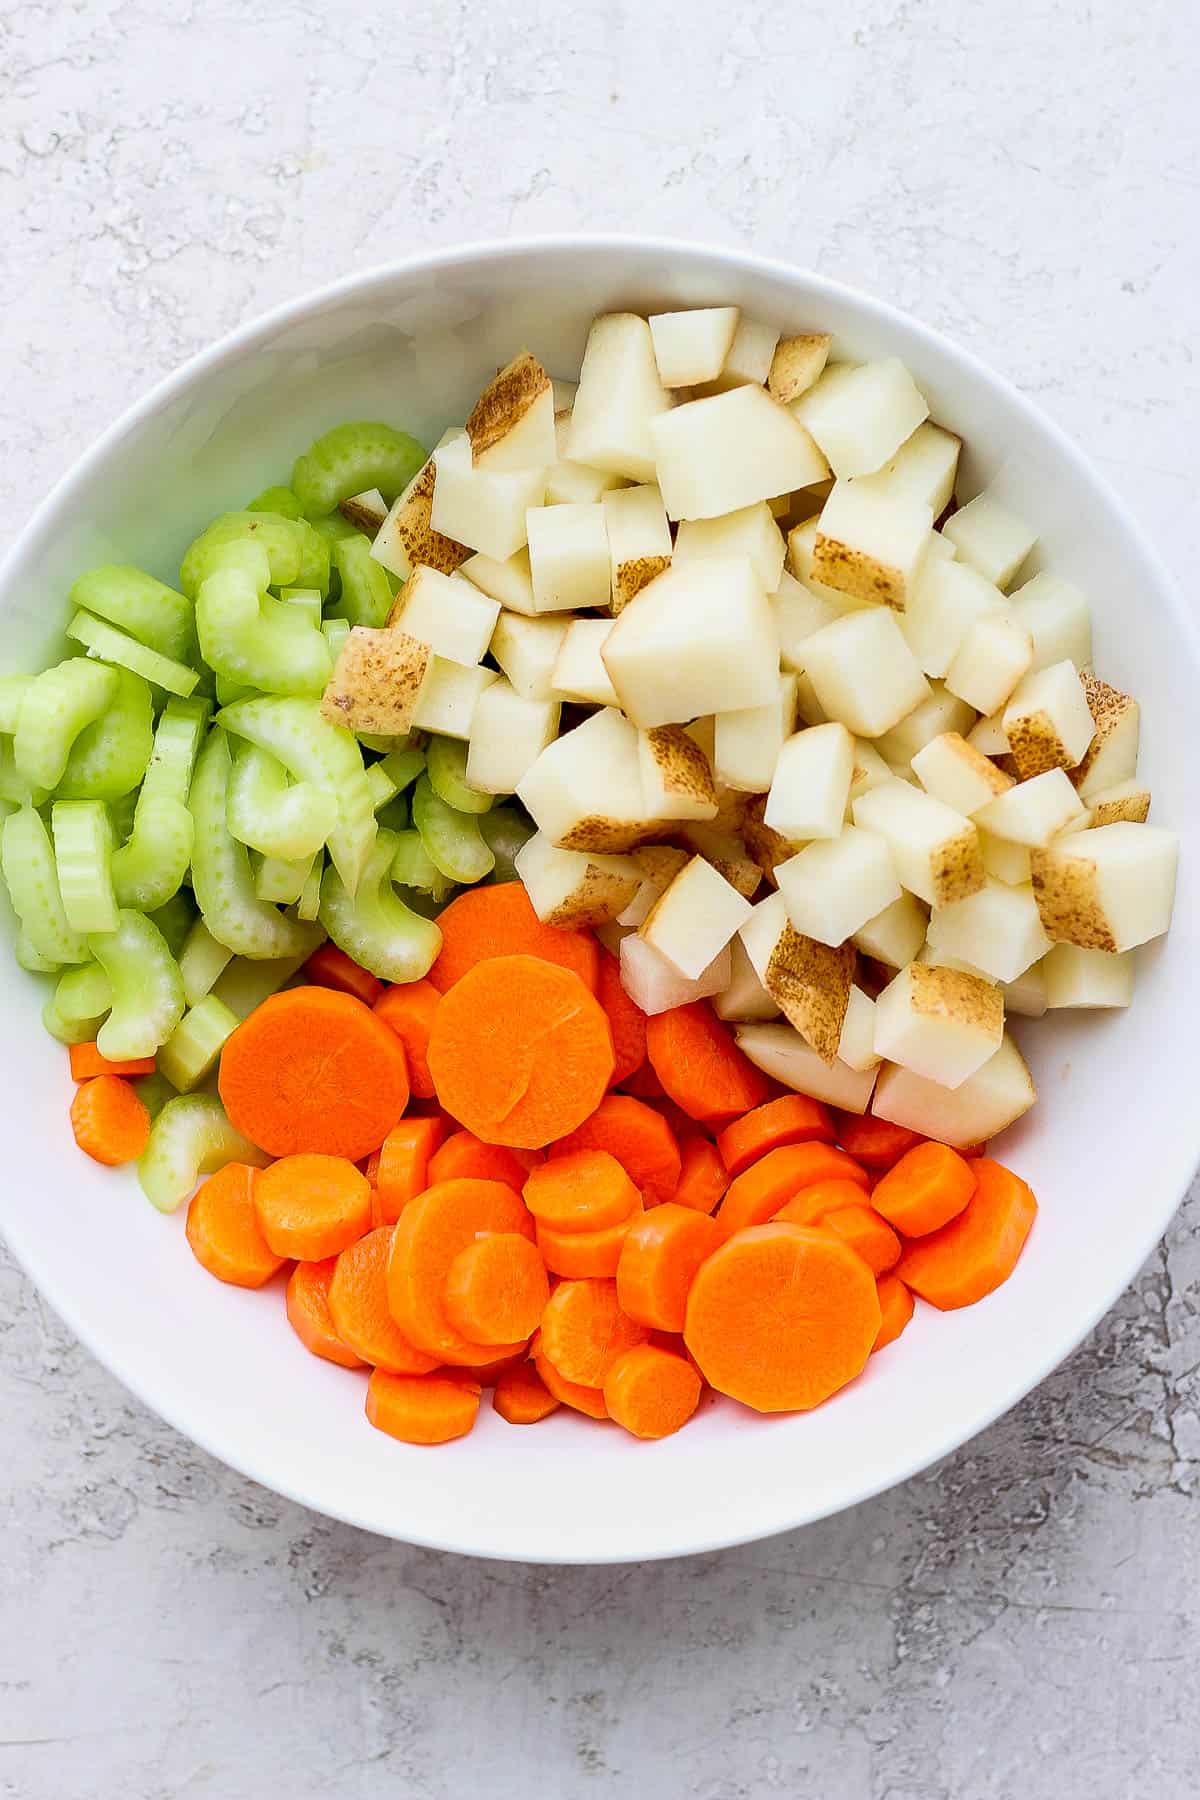 Cut-up celery, carrots, and potatoes in a bowl.